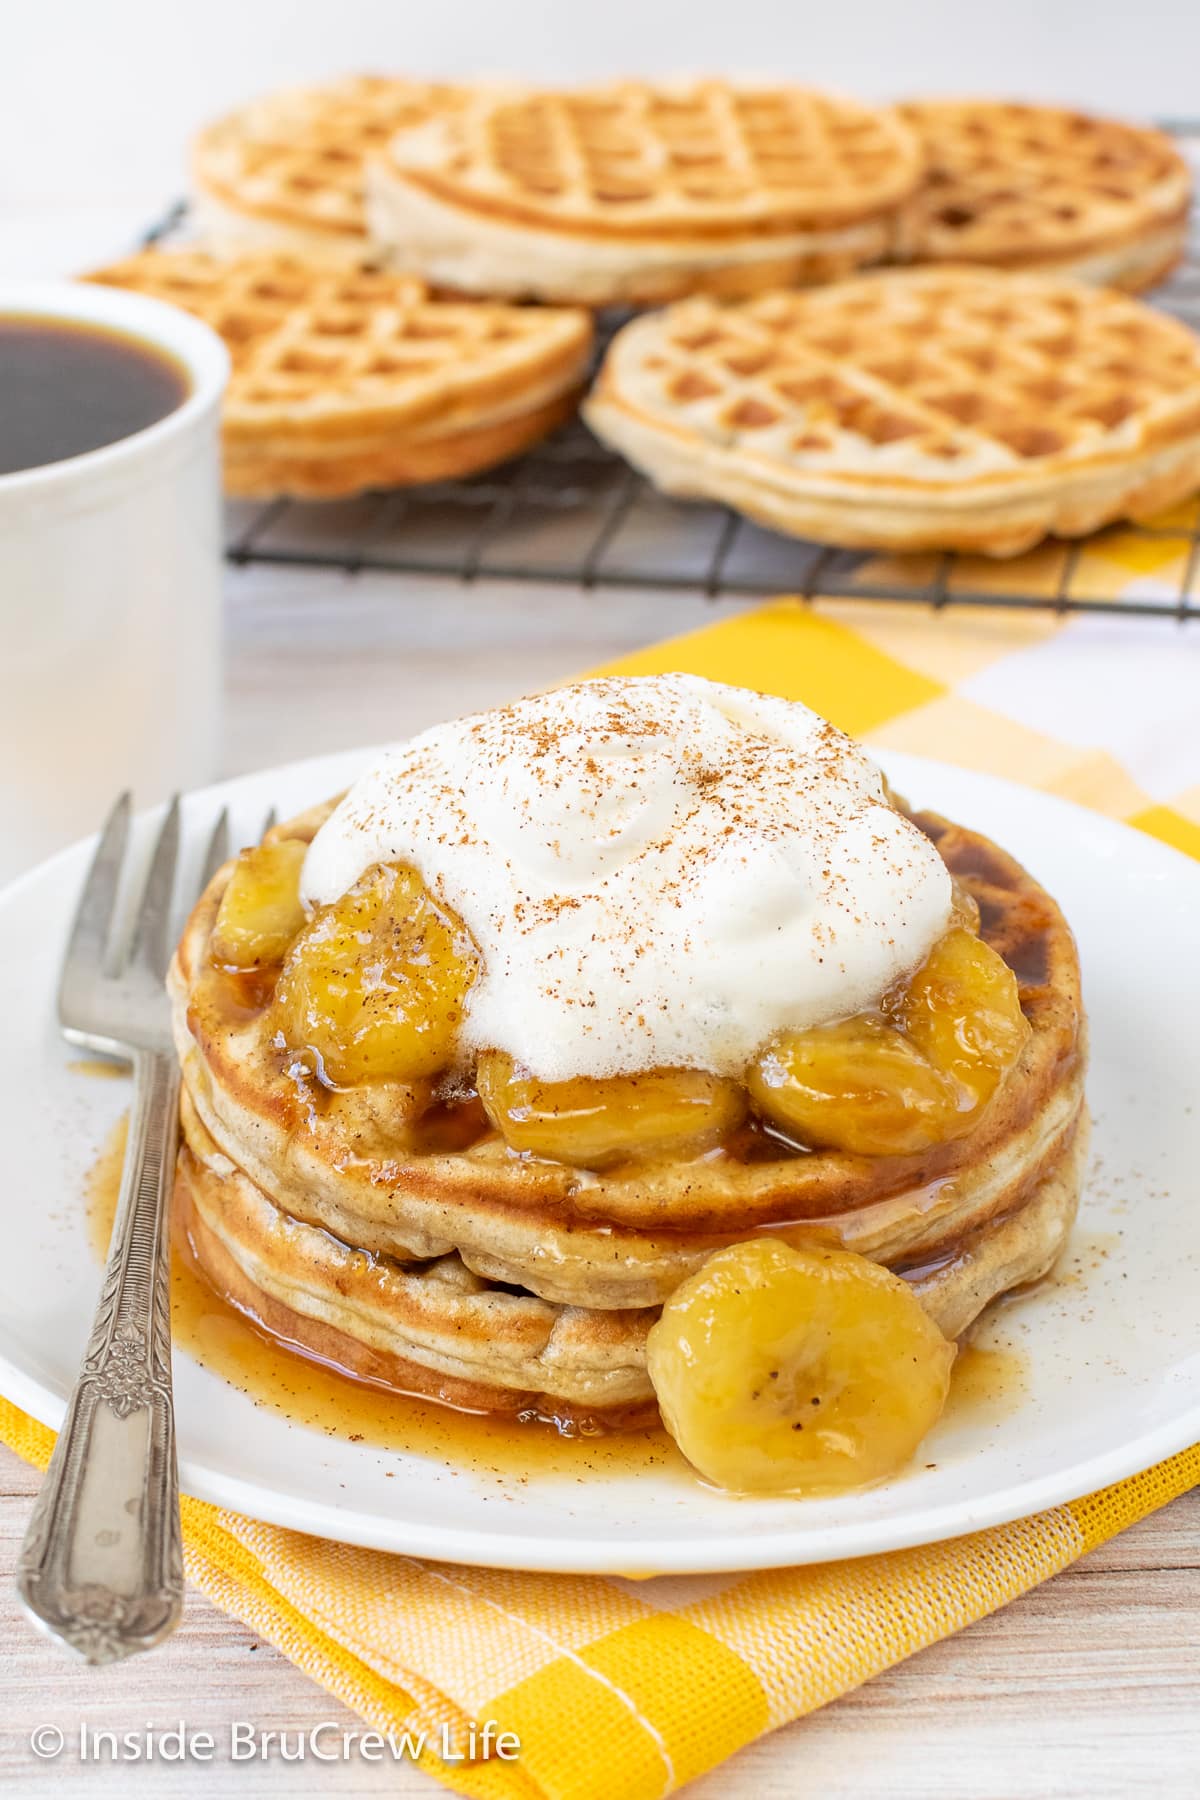 Waffles on a white plate topped with bananas and whipped cream.